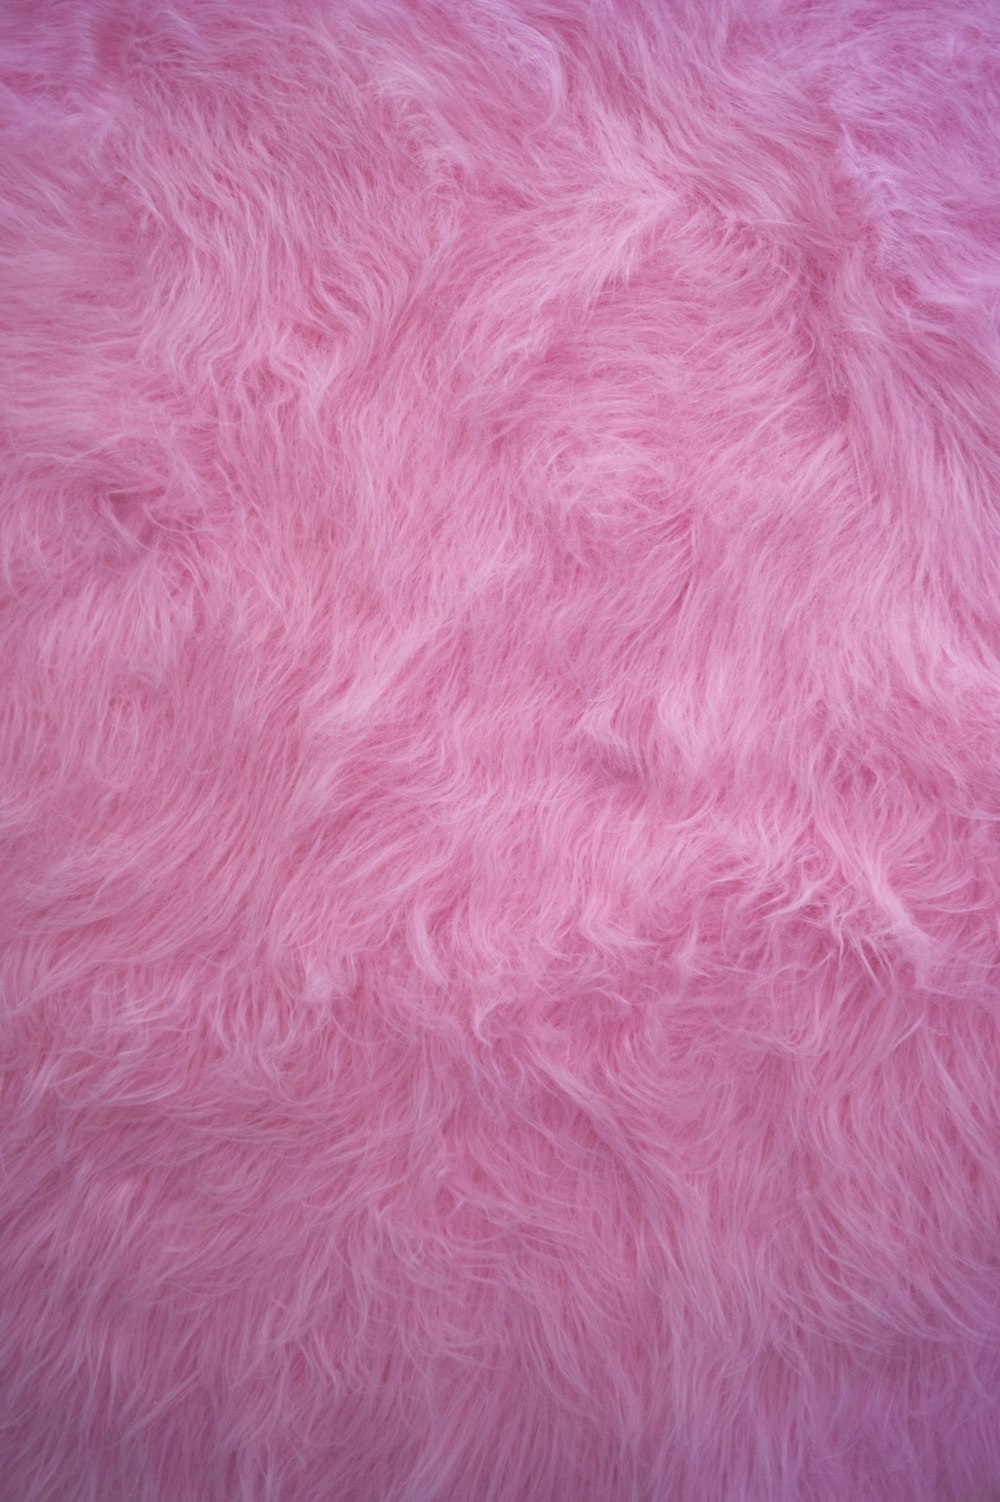 Pink Feather Pictures  Download Free Images on Unsplash